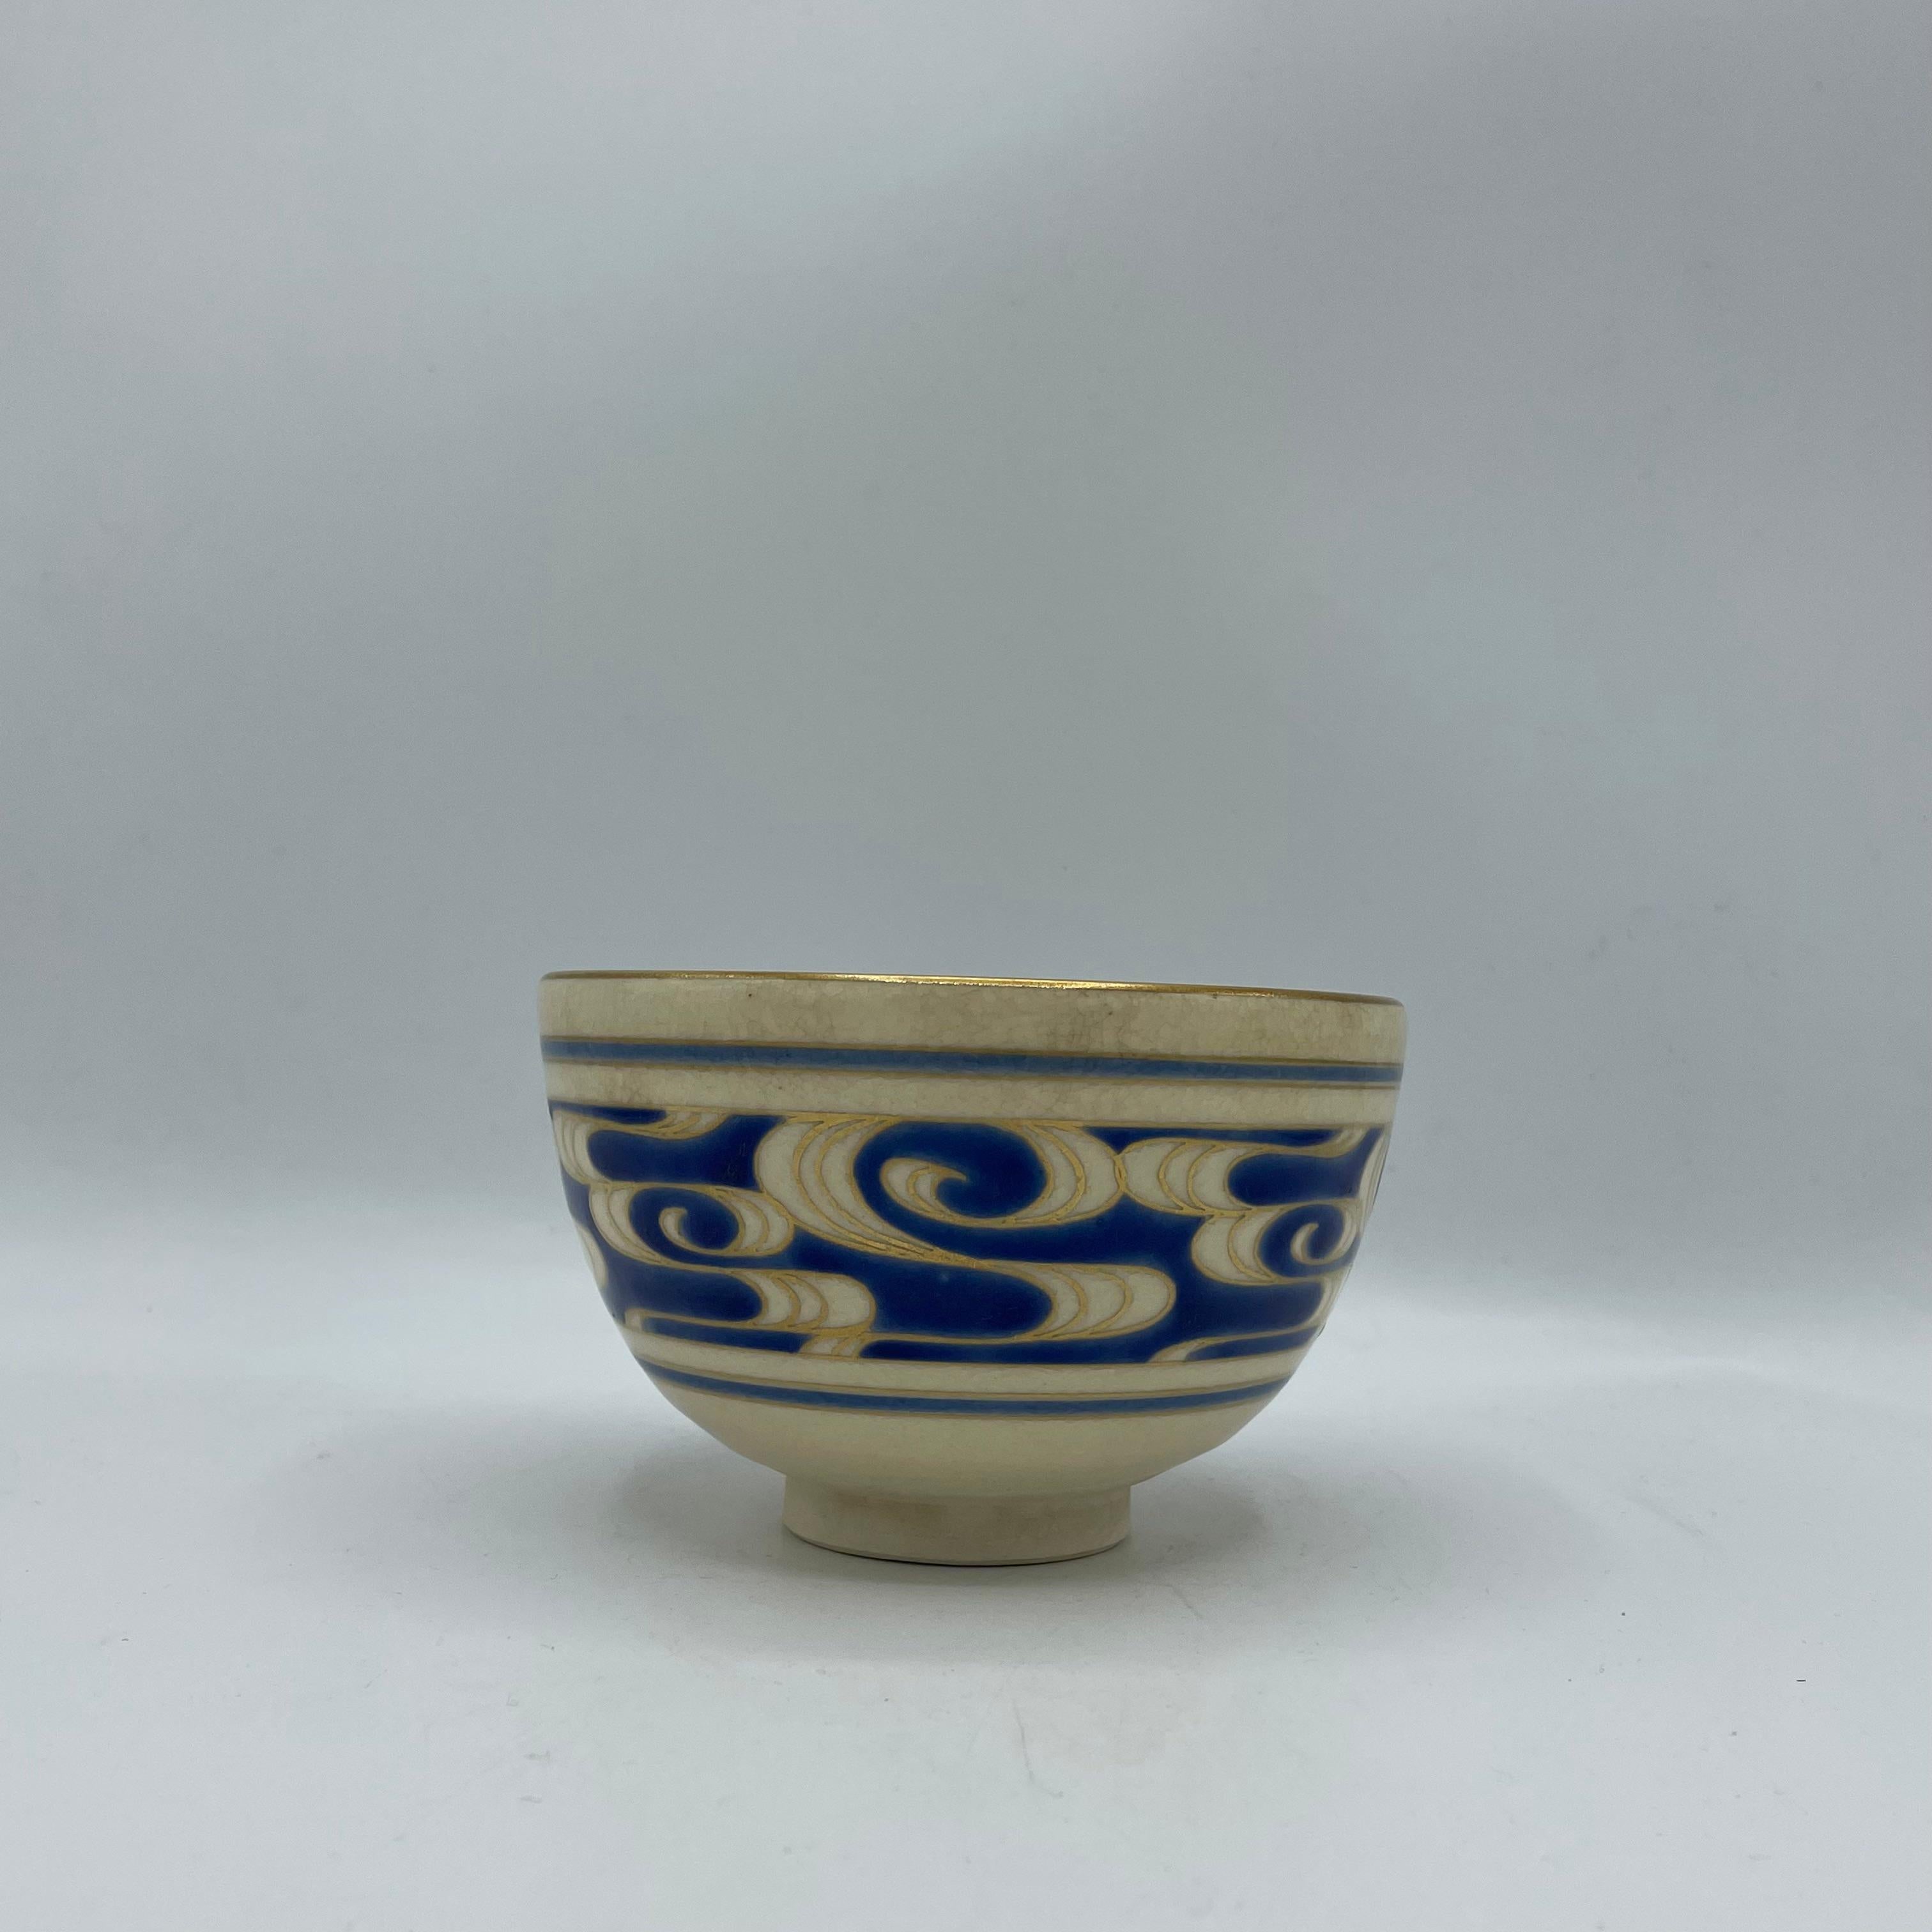 This is a matcha bowl for tea ceremony.
This bowl is made with porcelain and it was made around 1970s in Showa era.
Dimensions: 12 x 12 x H7,5 cm 